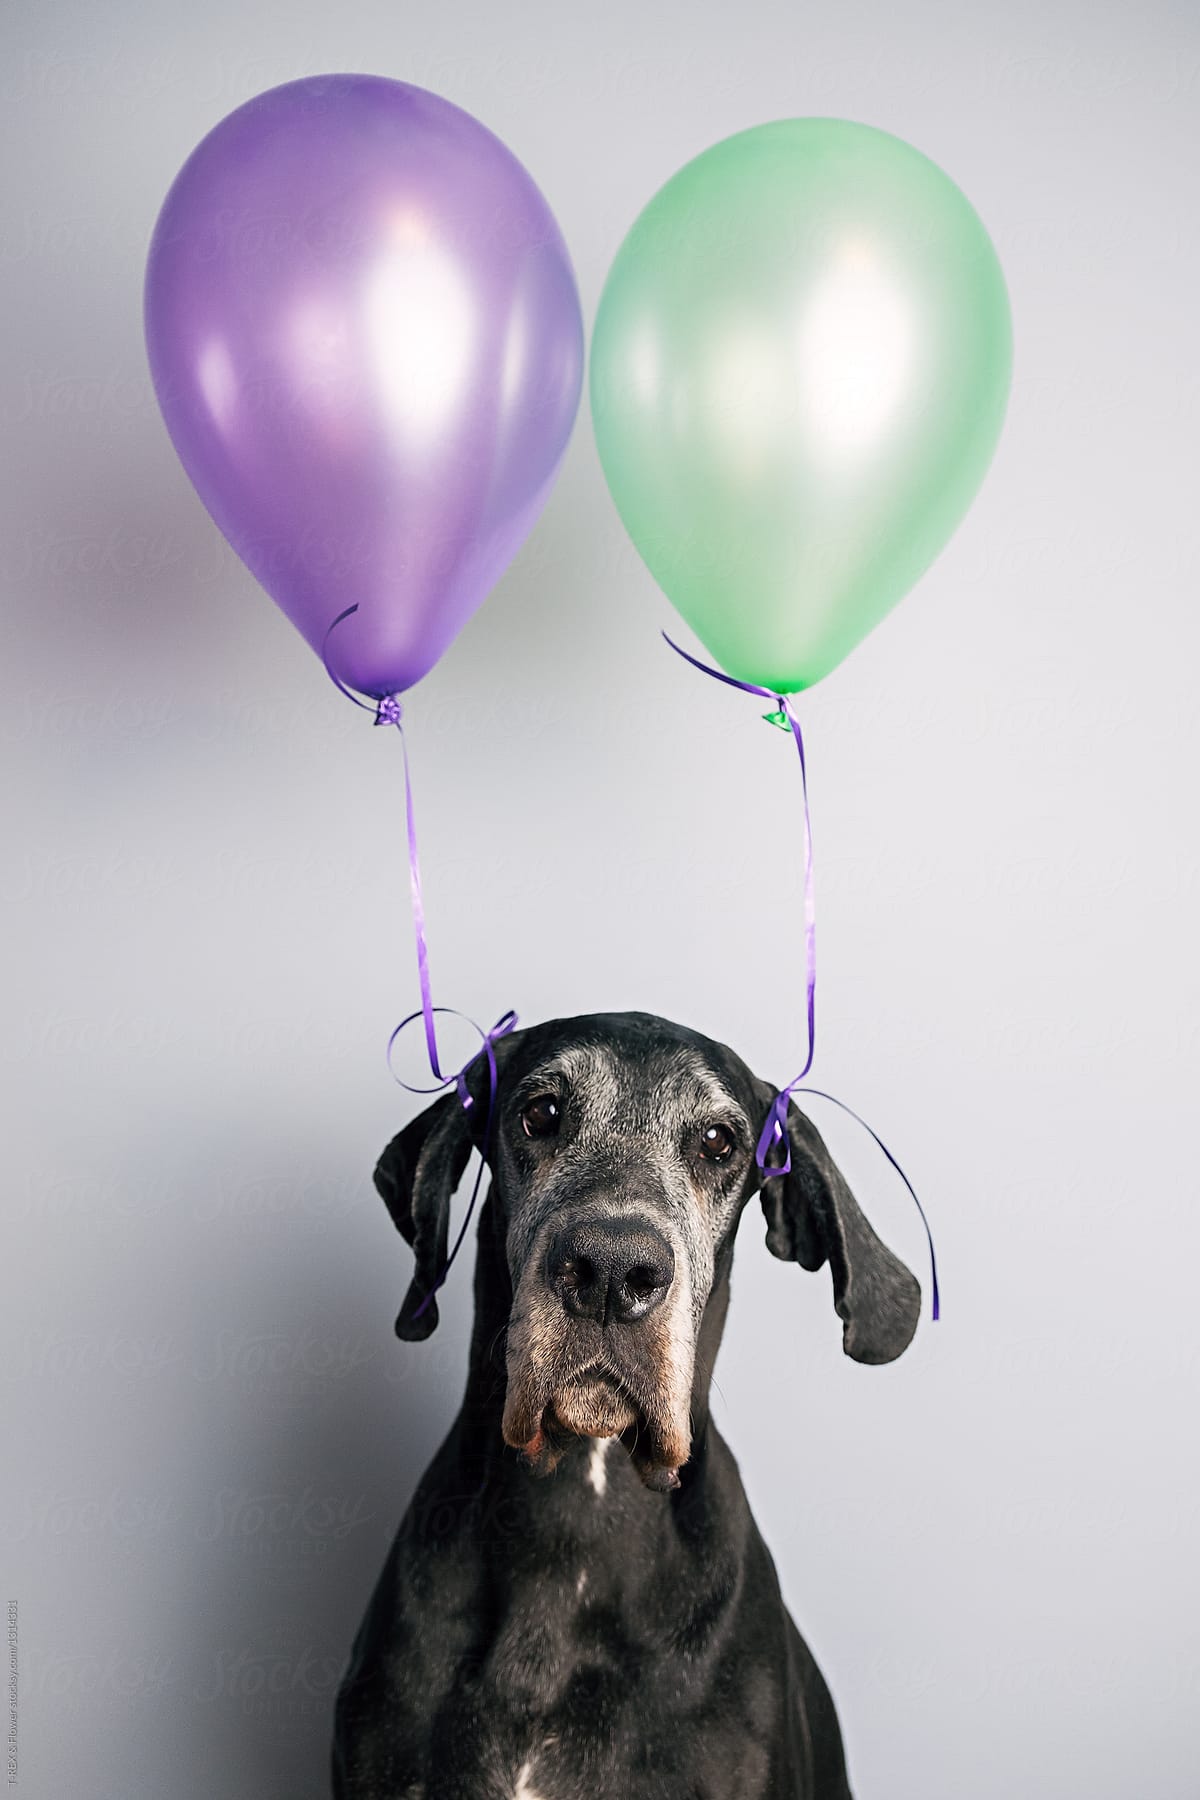 A dog with tied balloons